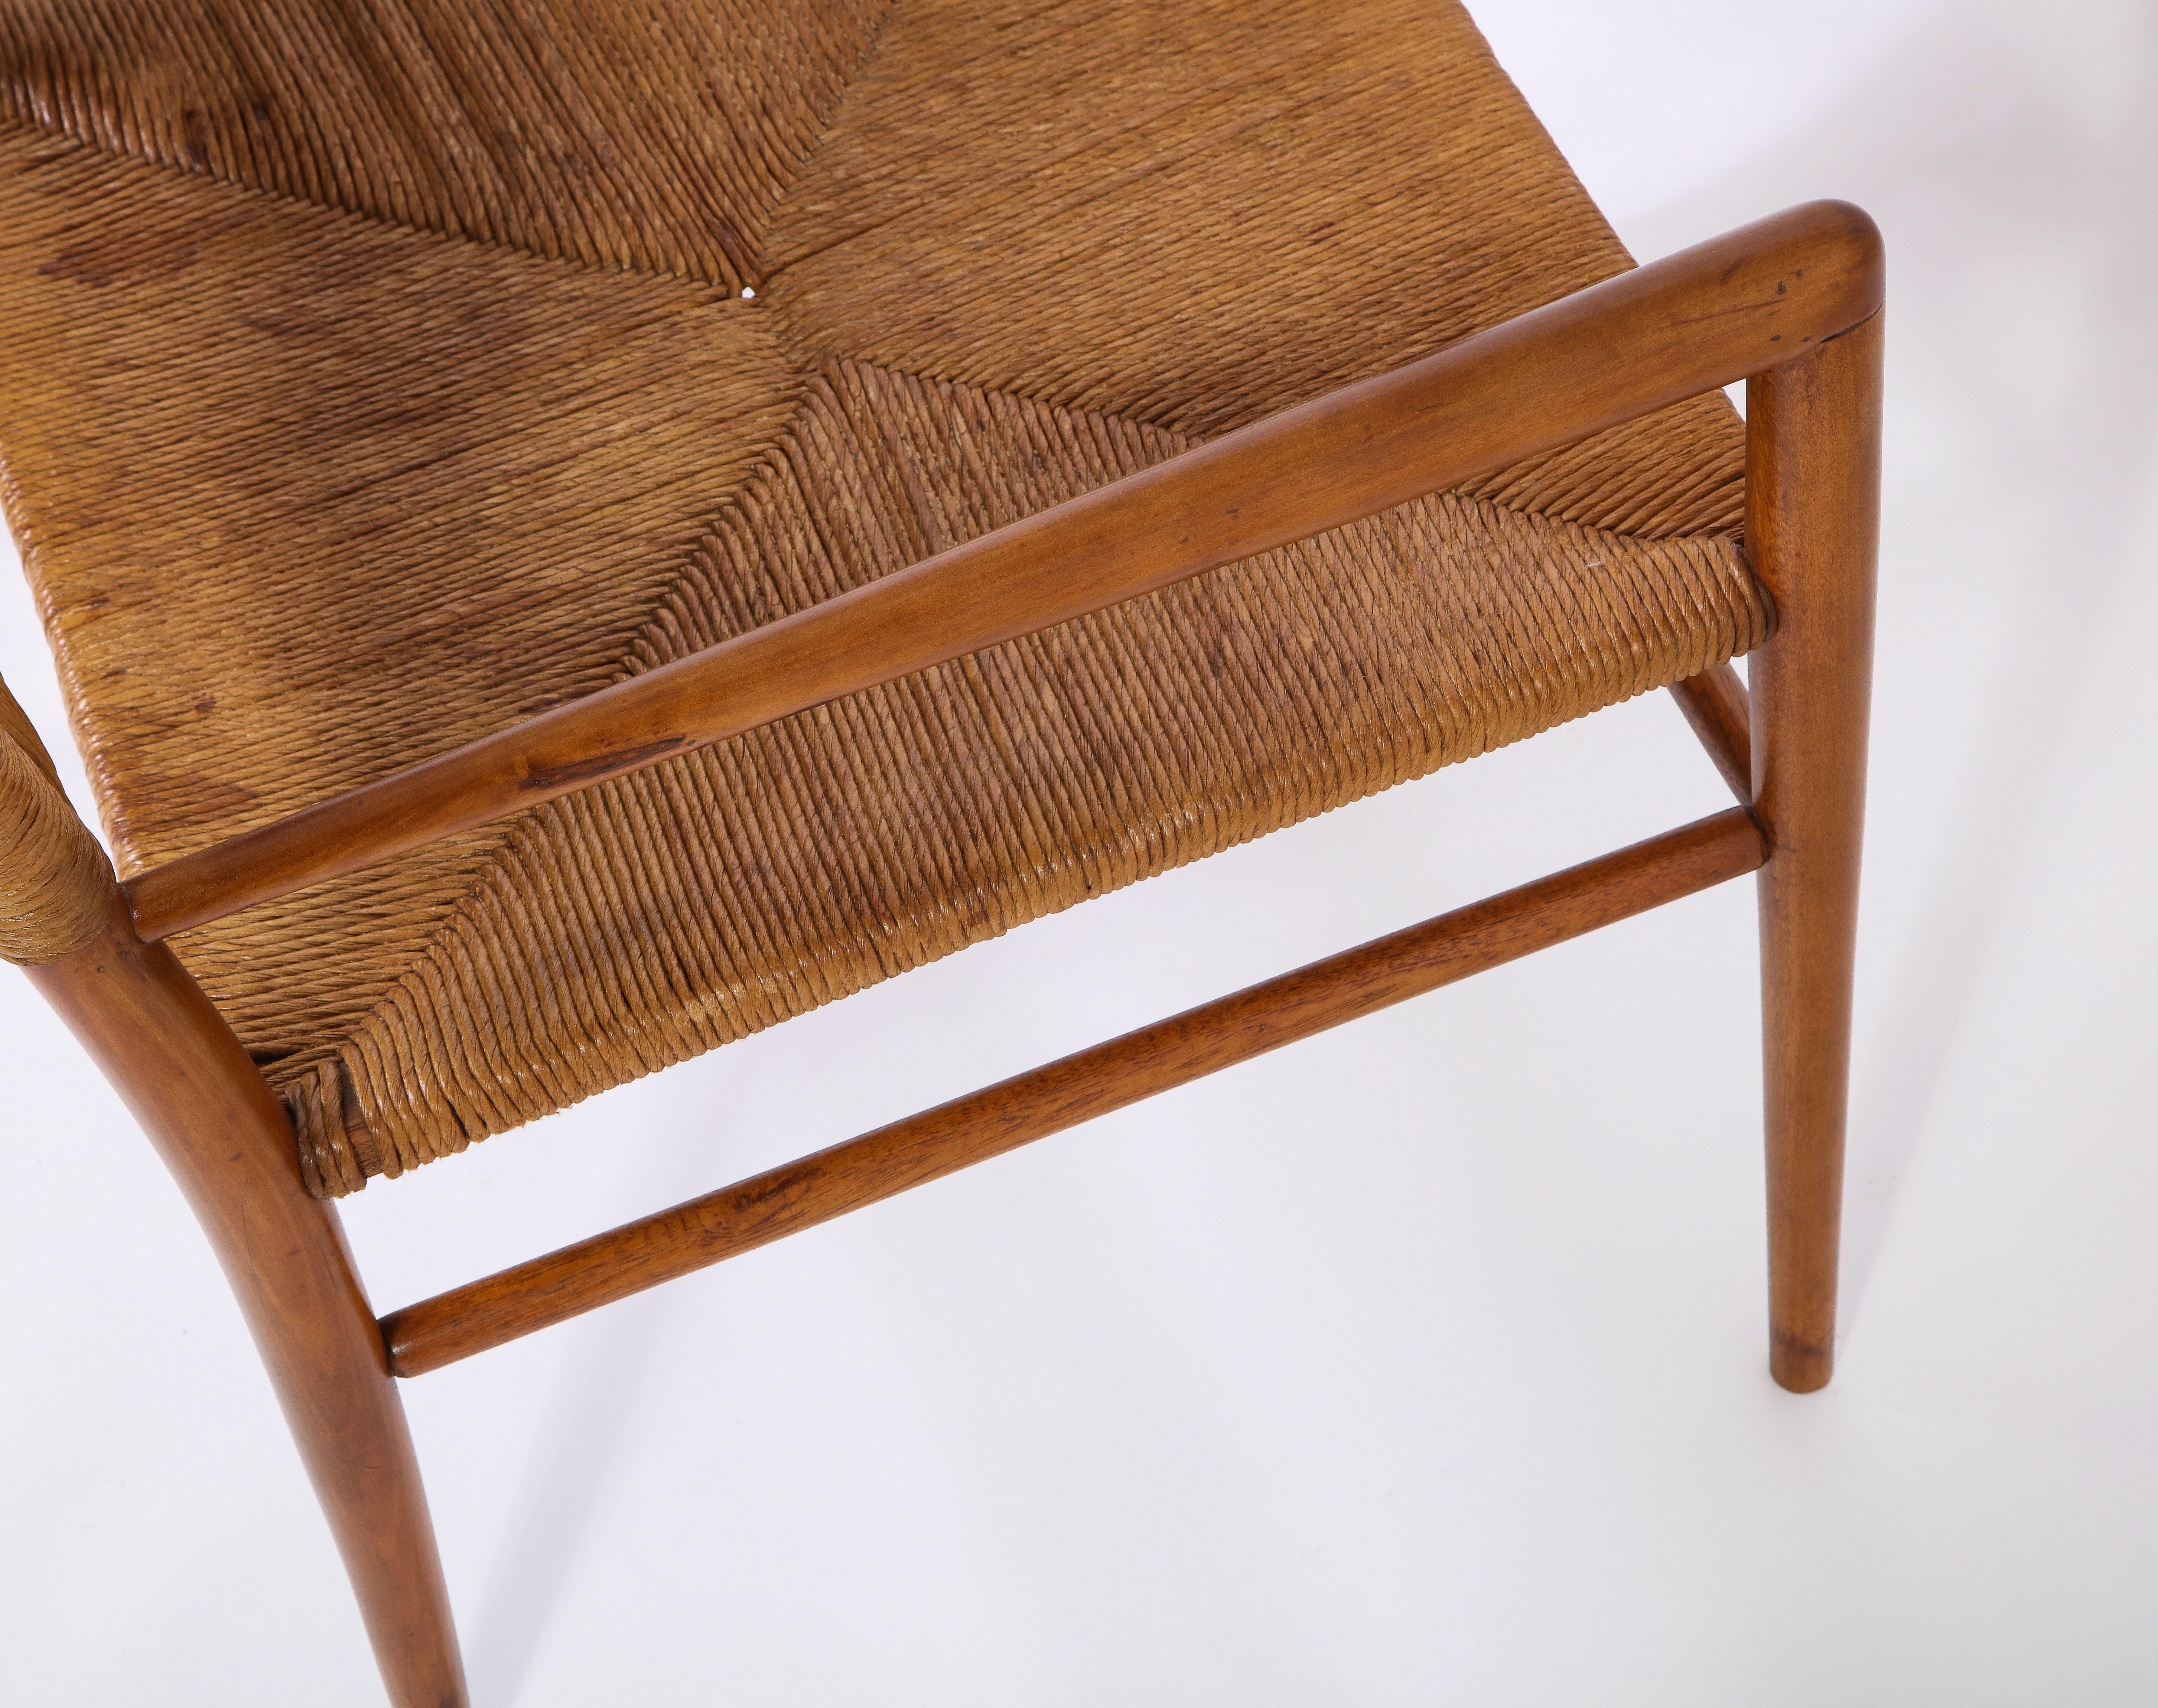 Pair of Vintage Oak and Rush Chairs by Mel Smilow, USA, 1960 For Sale 3